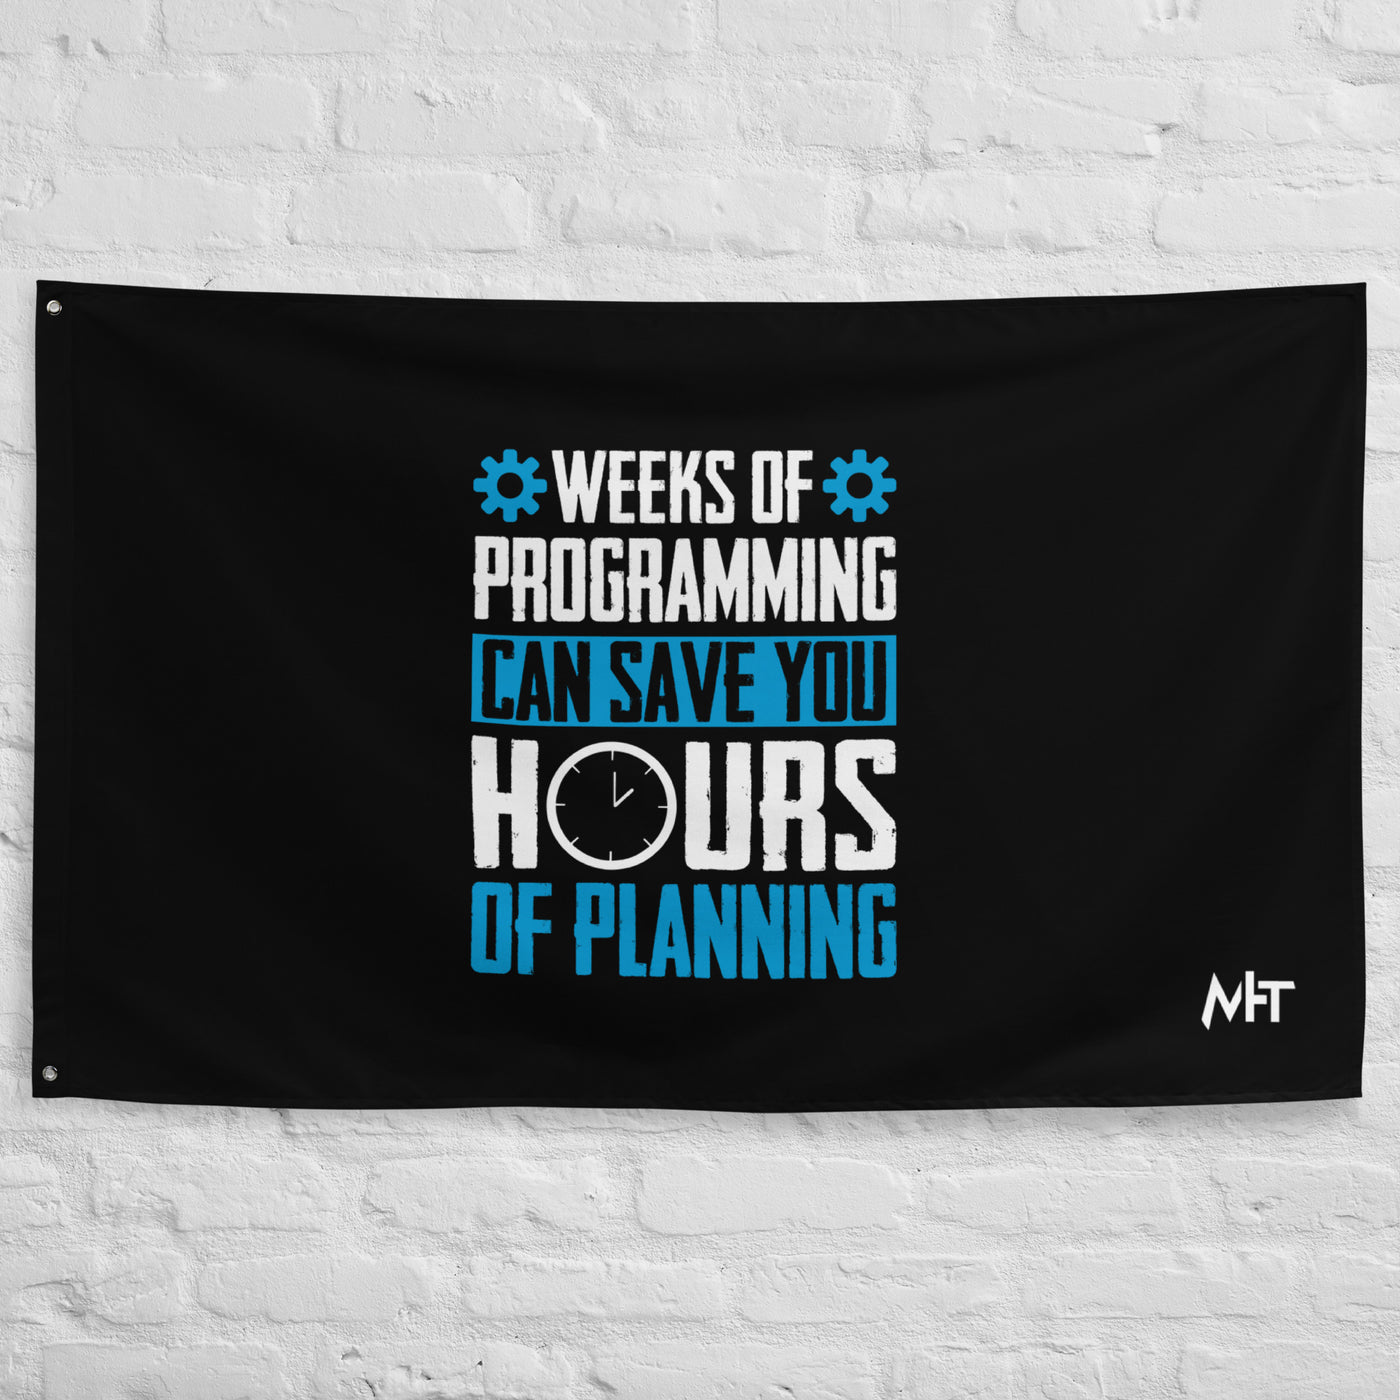 Weeks of Programming can save you Hours of Planning - Flag